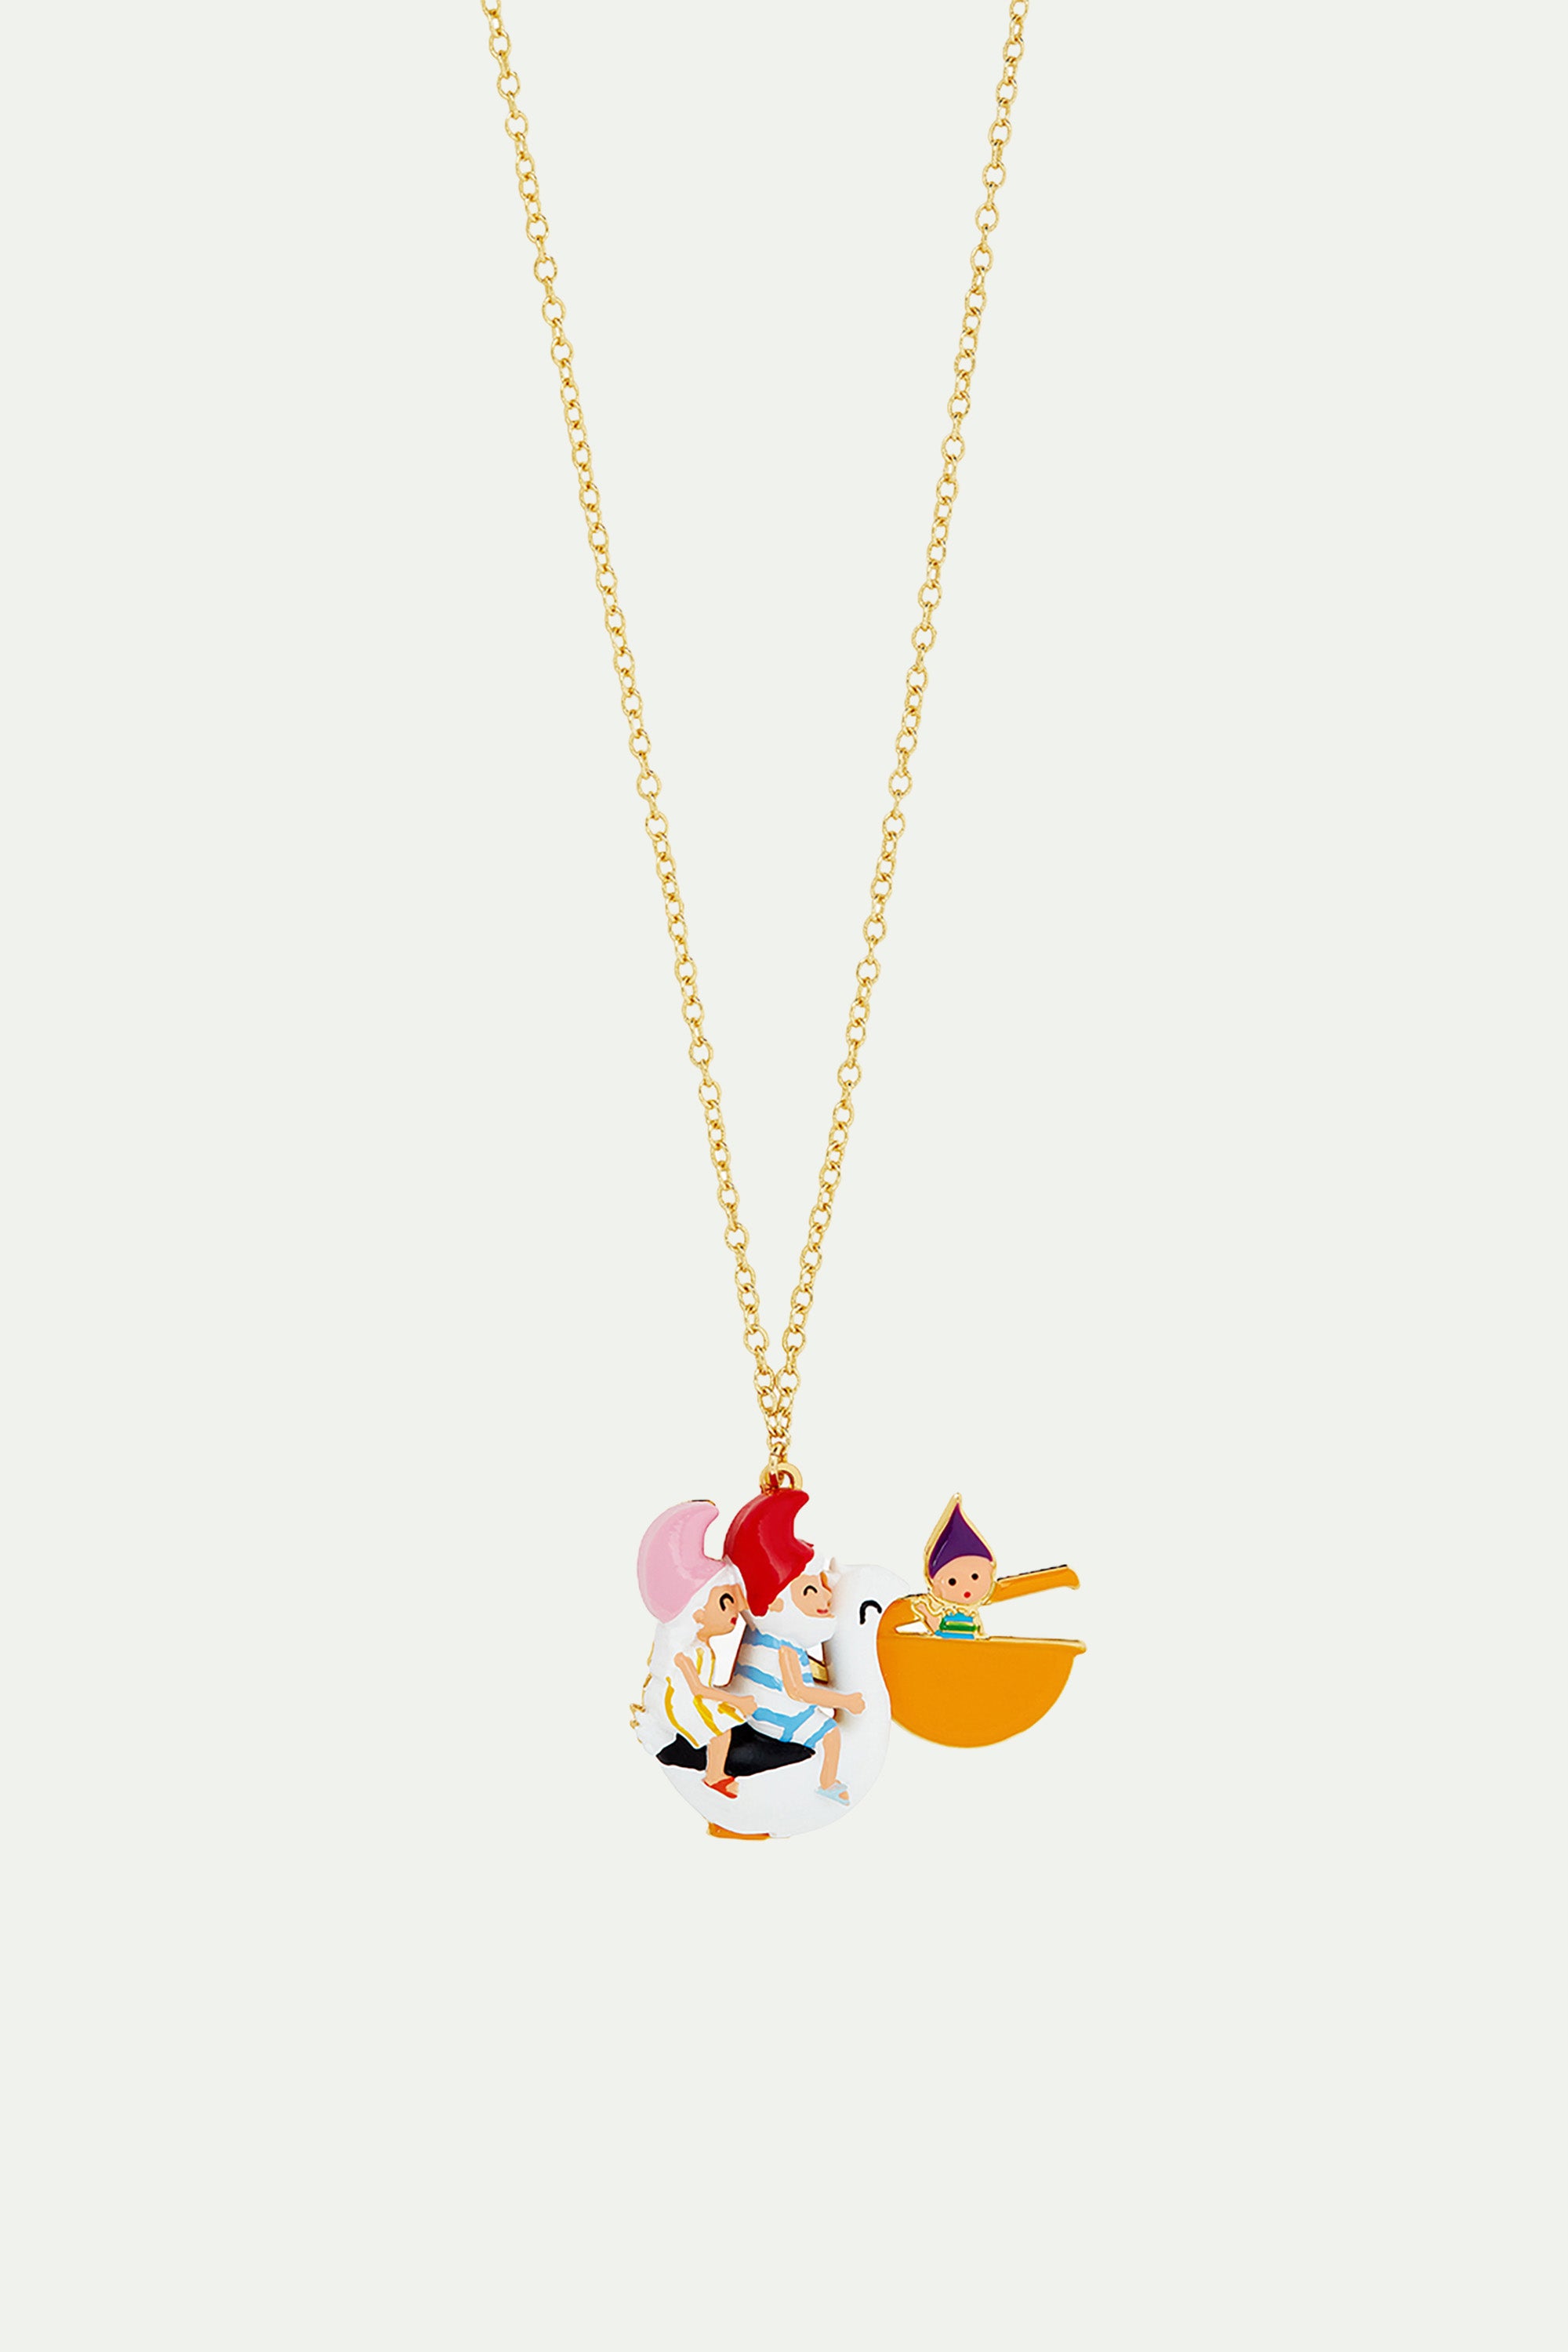 Toadstool family couple riding a pelican pendant necklace